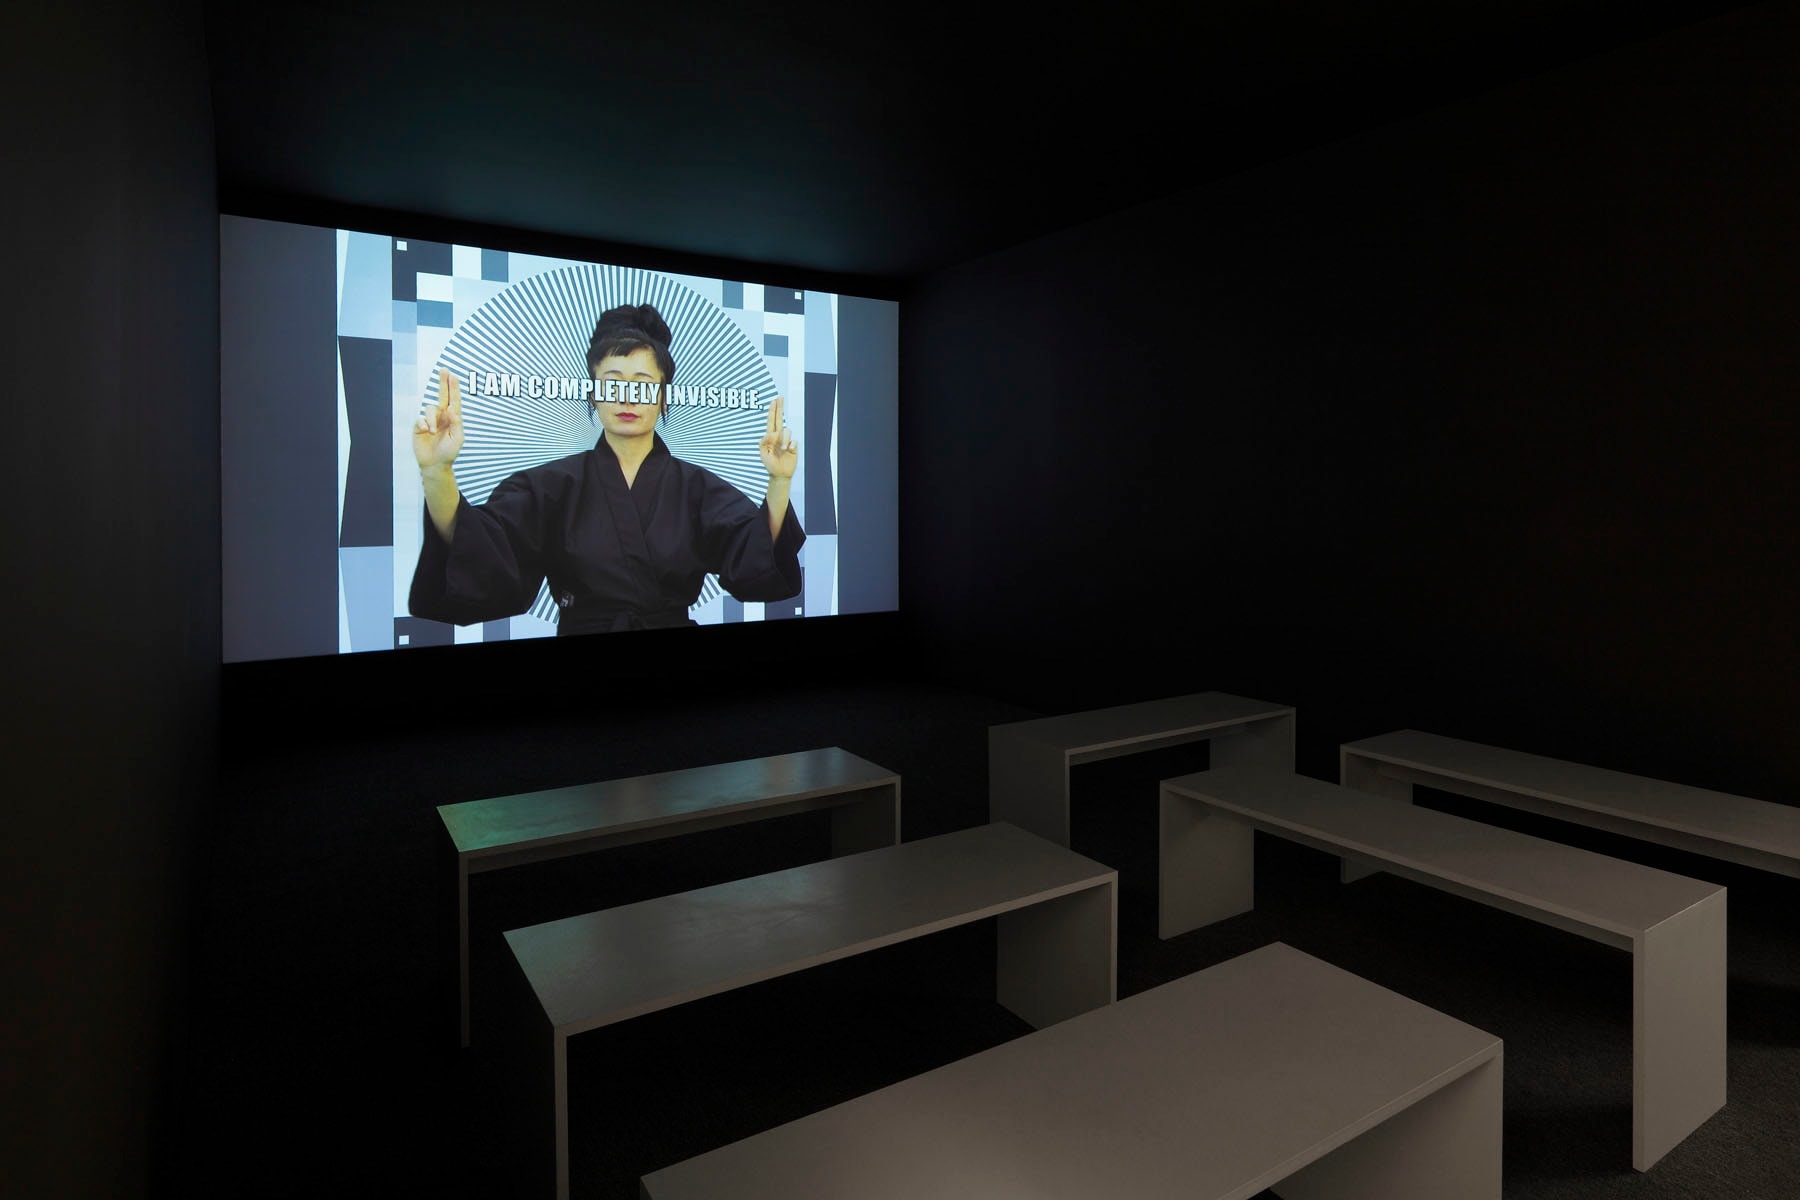 Hito Steyerl,&nbsp;How Not to Be Seen: A Fucking Didactic Educational InstallationJuly 2 - August 15, 2014,&nbsp;Andrew Kreps Gallery, 537 W 22nd Street,&nbsp;New York